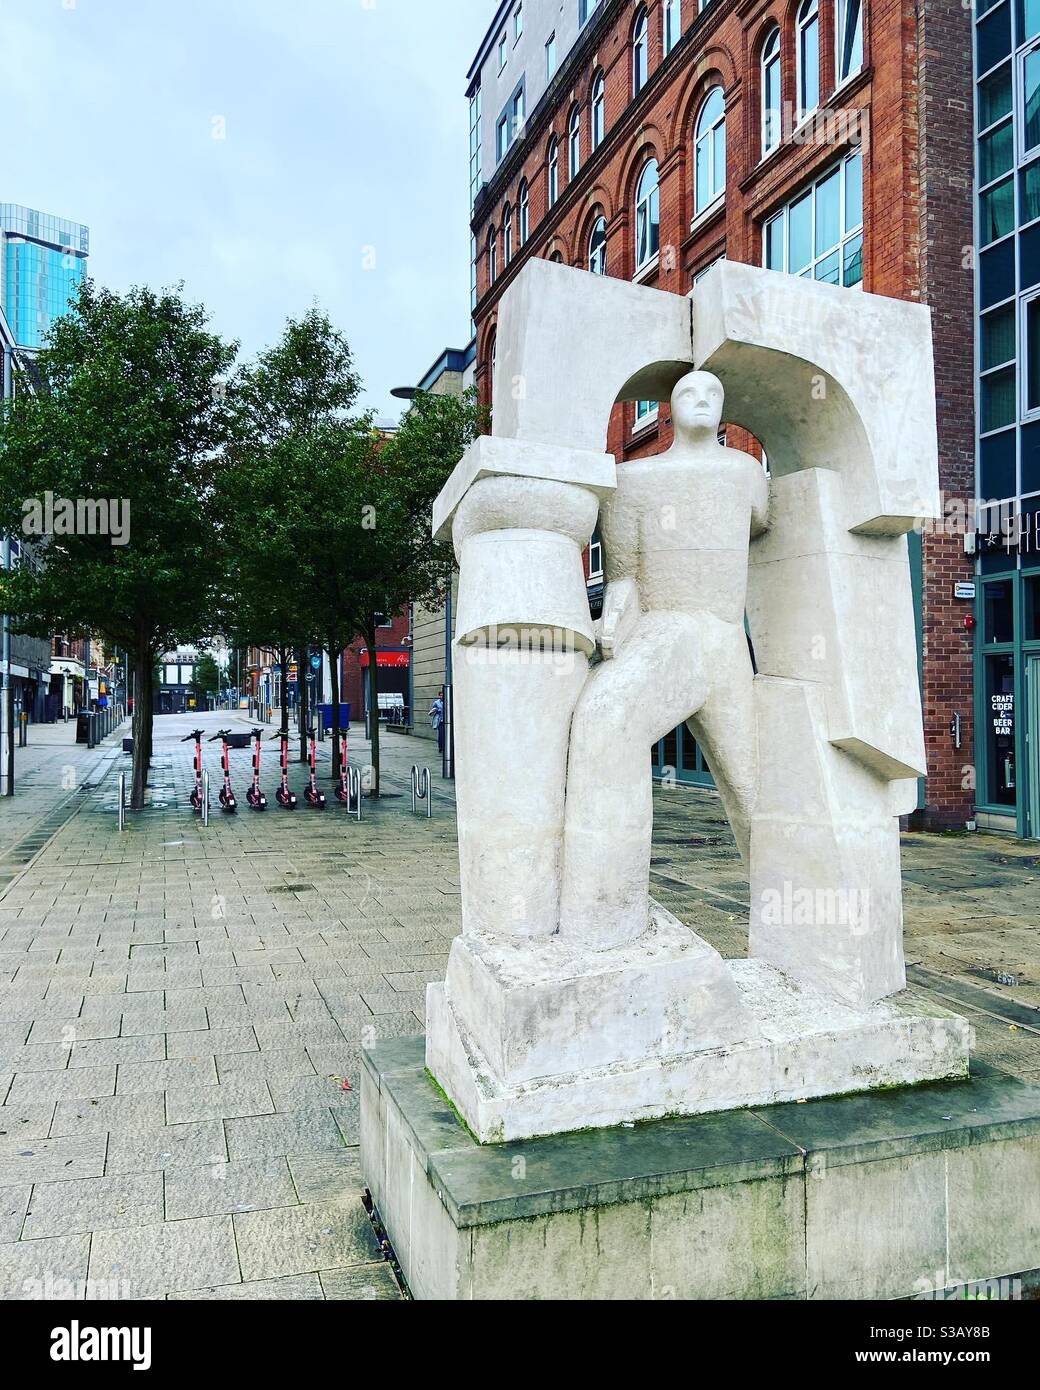 Statue and scooters in Birmingham Stock Photo